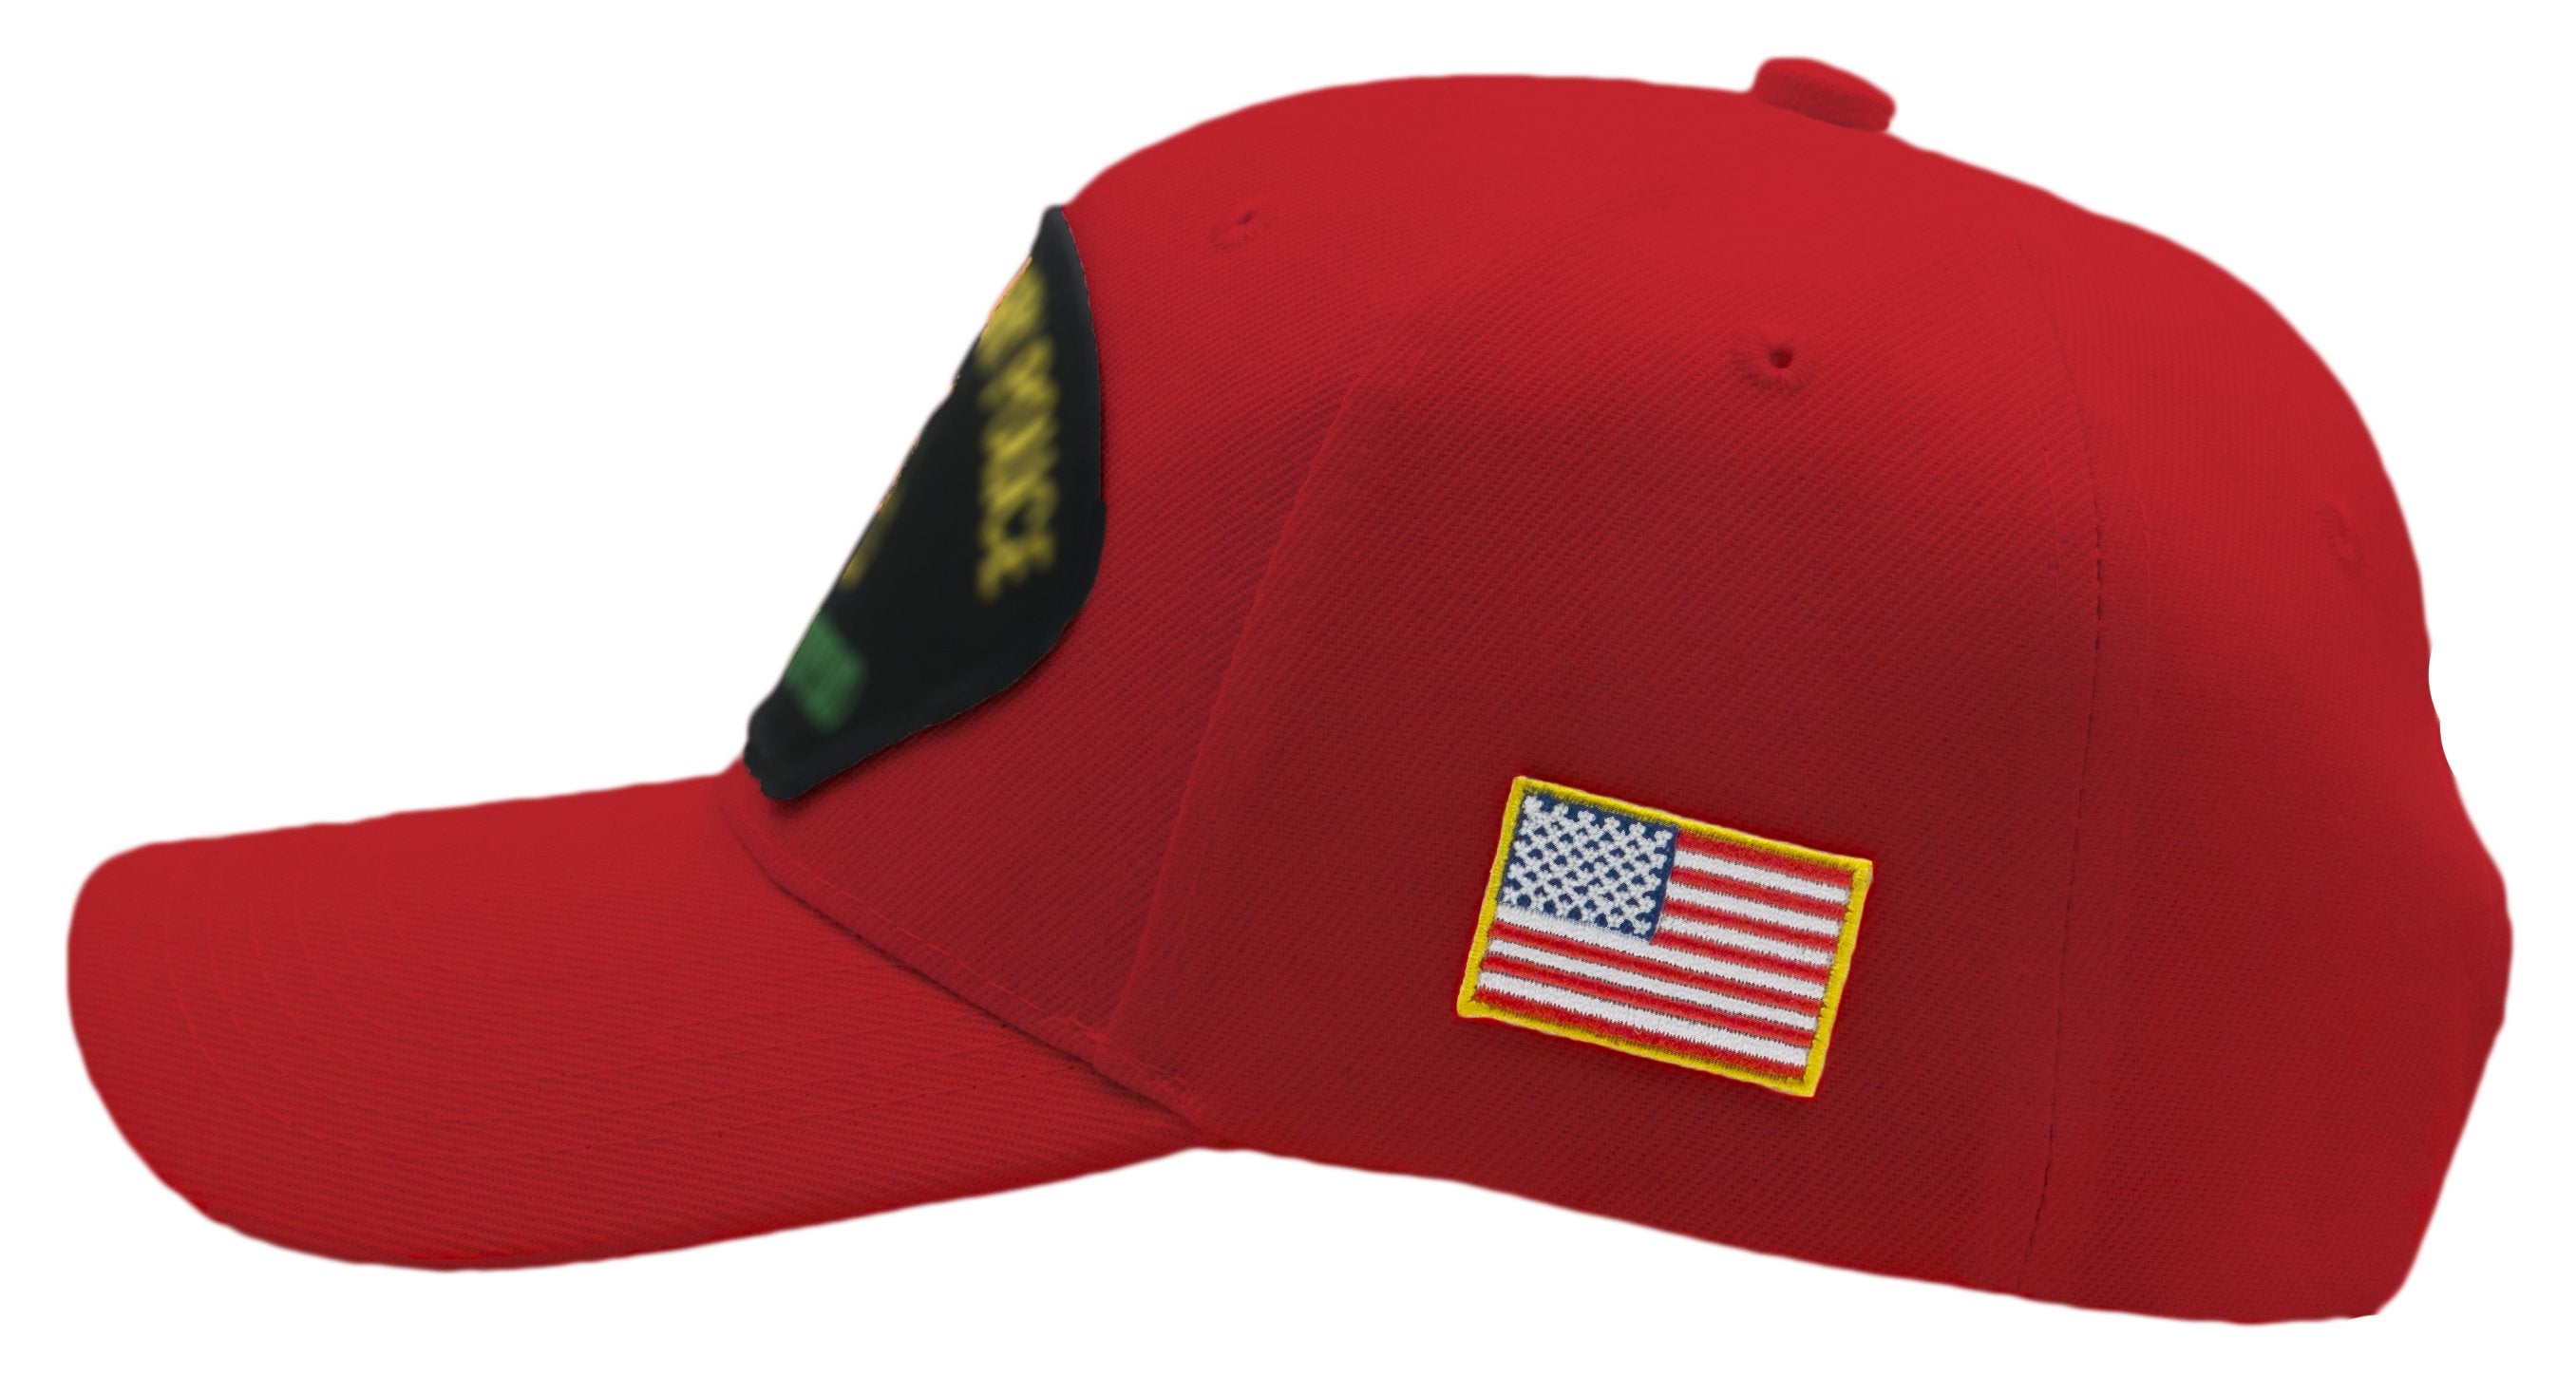 US Air Force Retired Hat - Multiple Colors Available